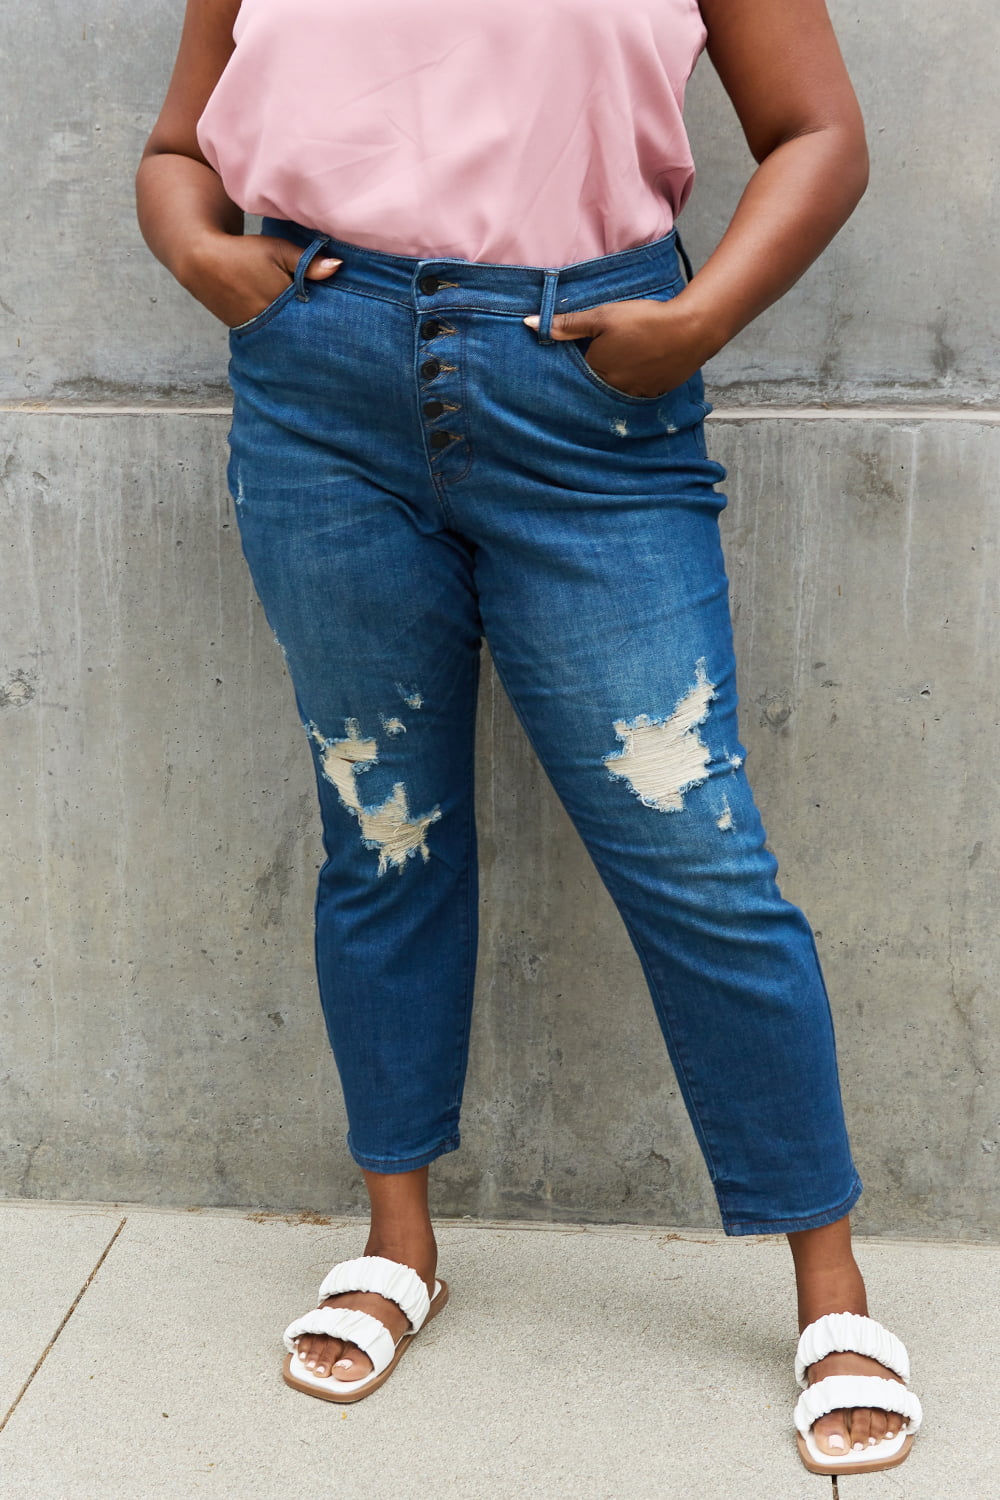 Plus Size, Judy Blue, High Waist Zigzag and Button Fly Destroyed Boyfriend Jeans Style 88526